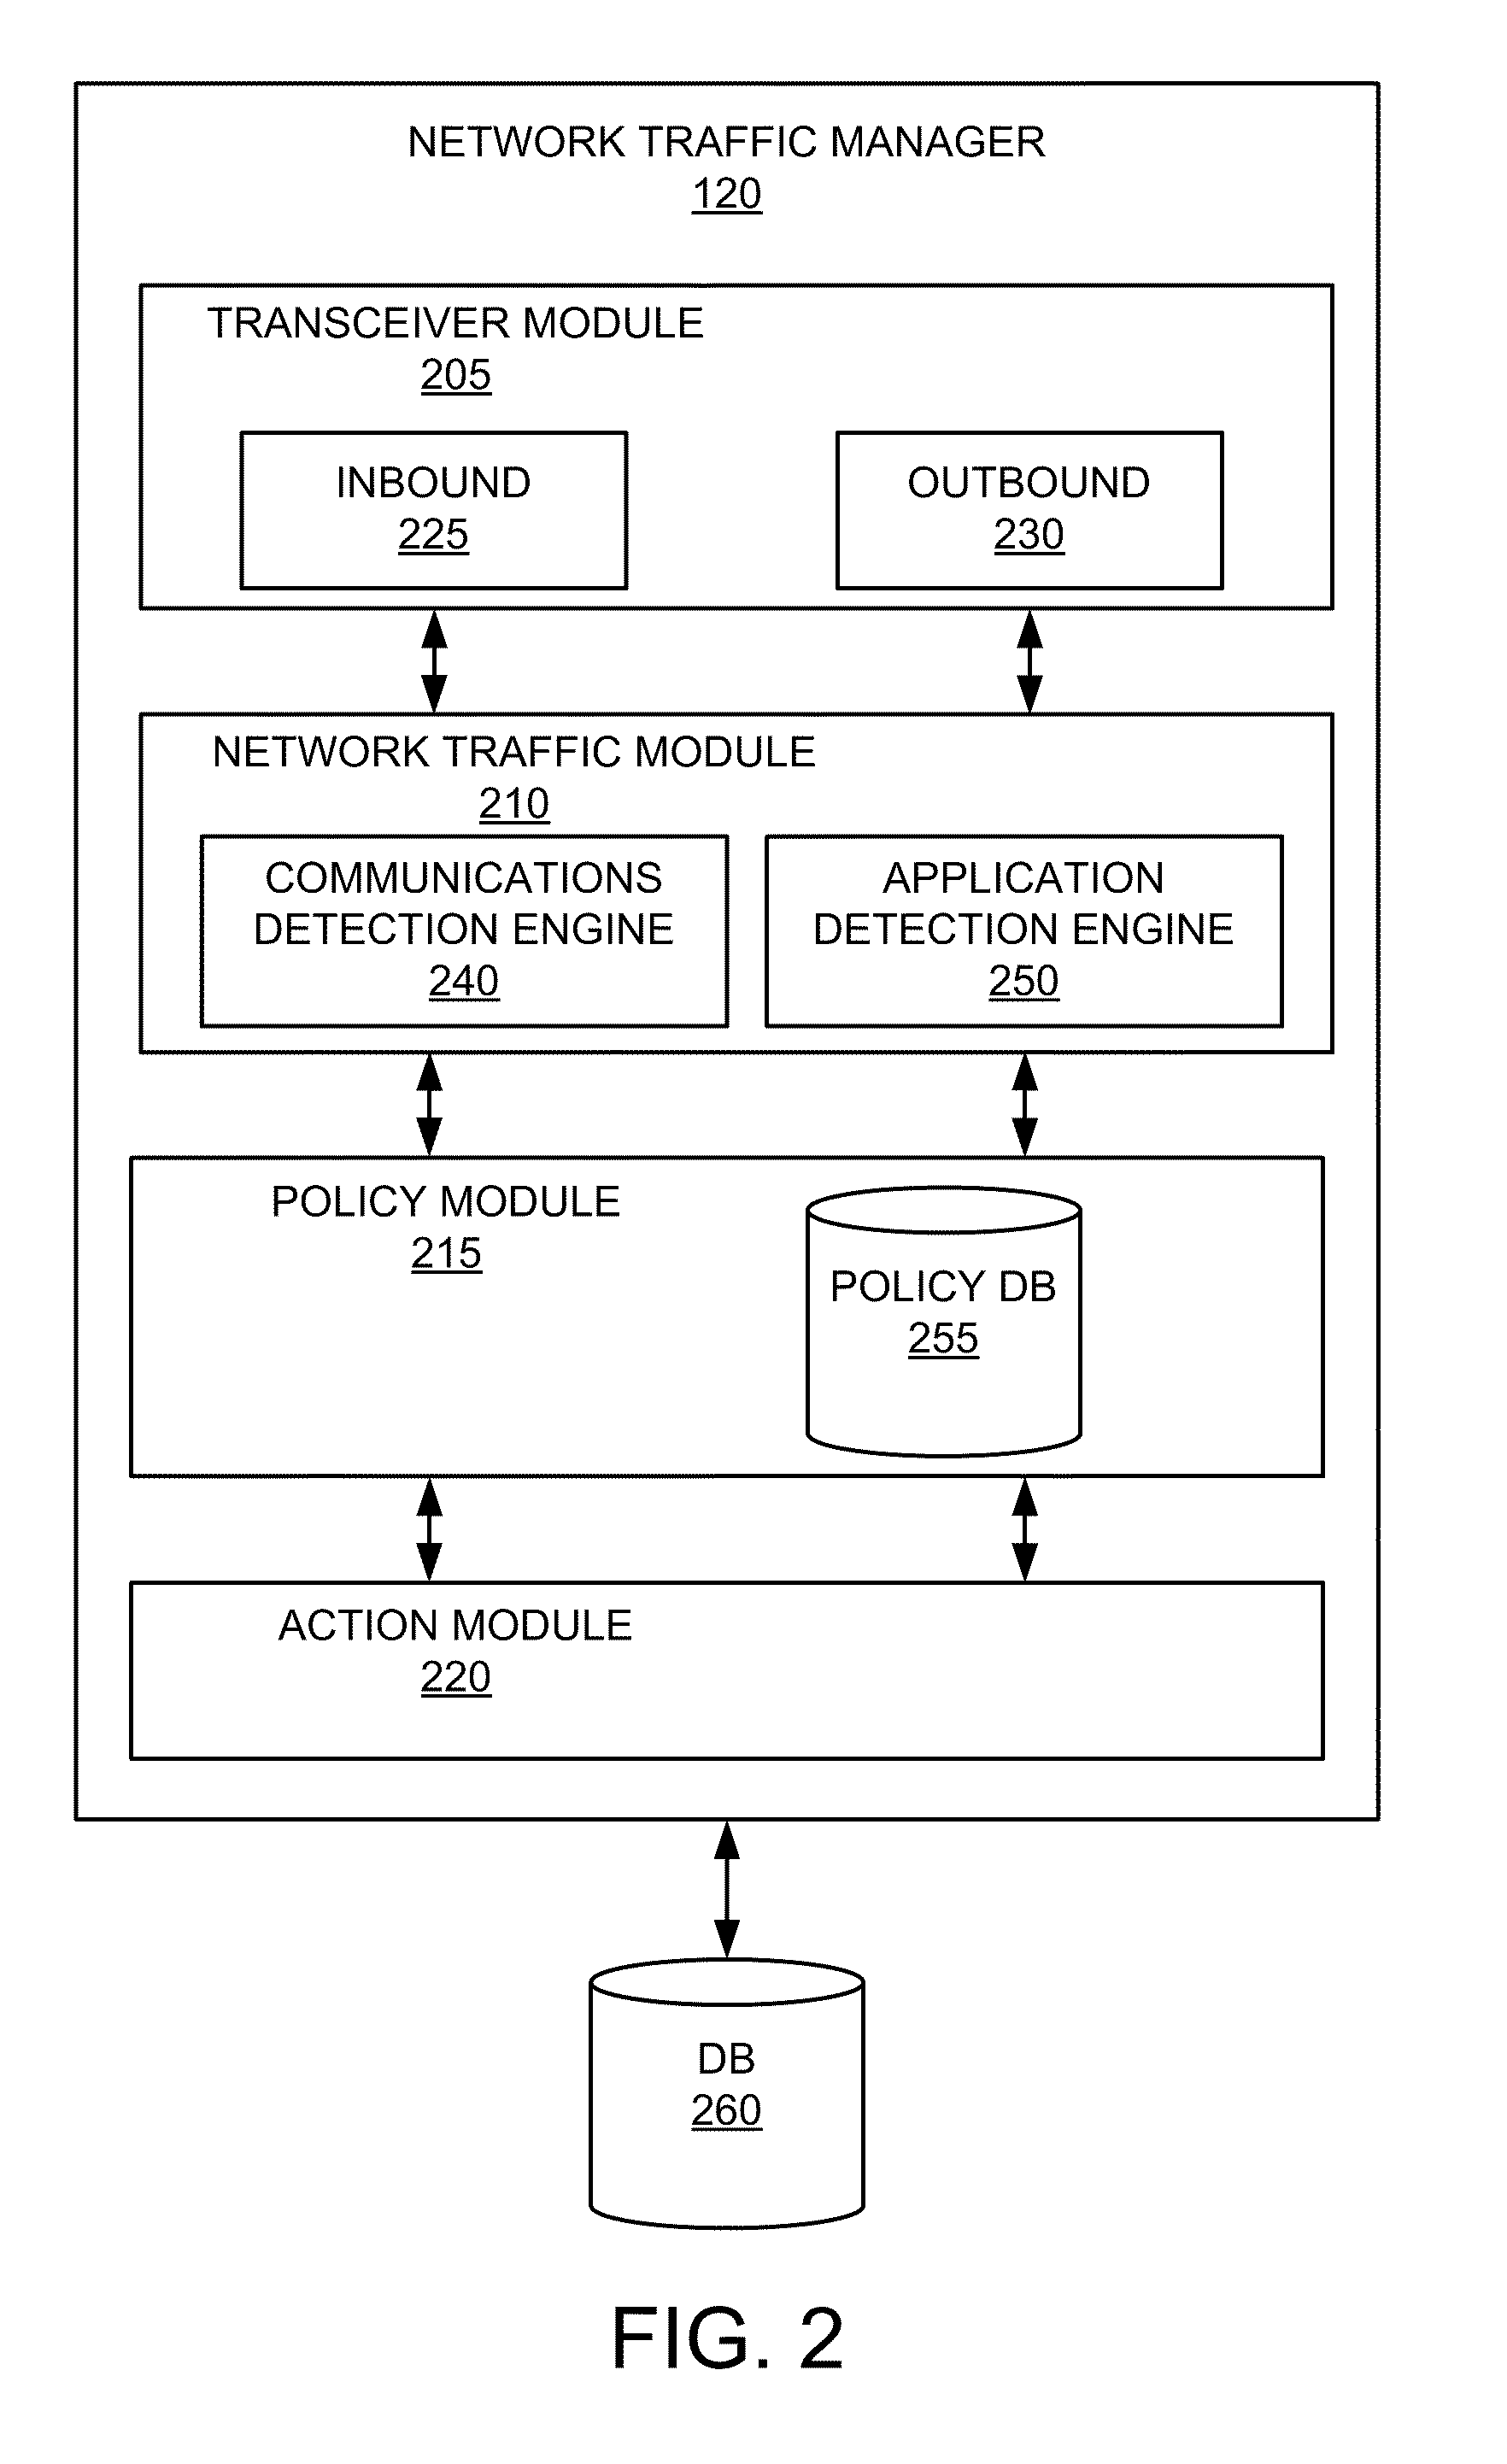 Methods, systems, and user interfaces for graphical summaries of network activities